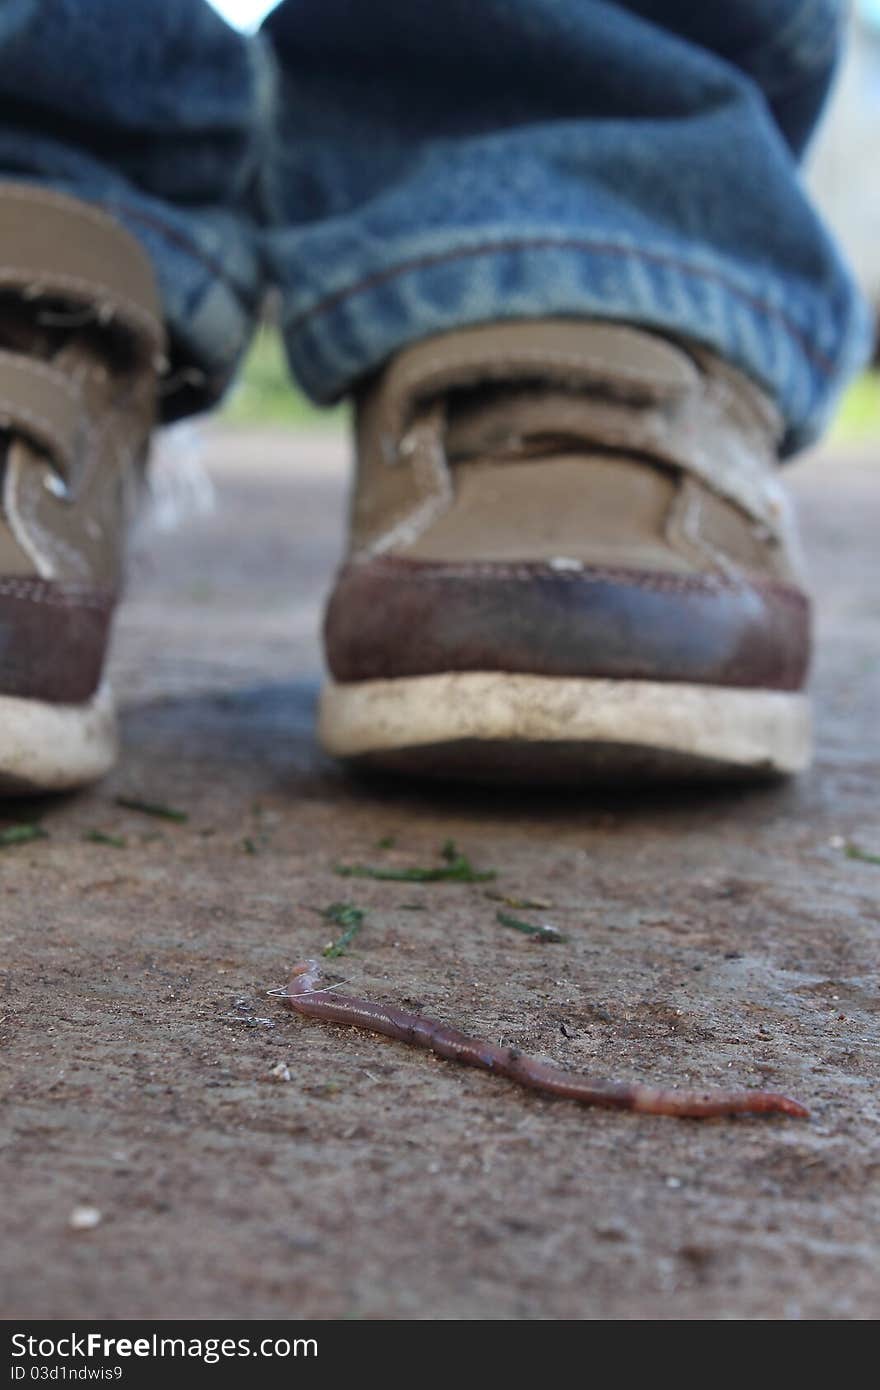 A worm on a sidewalk with a little boys shoes and pant legs in the background.